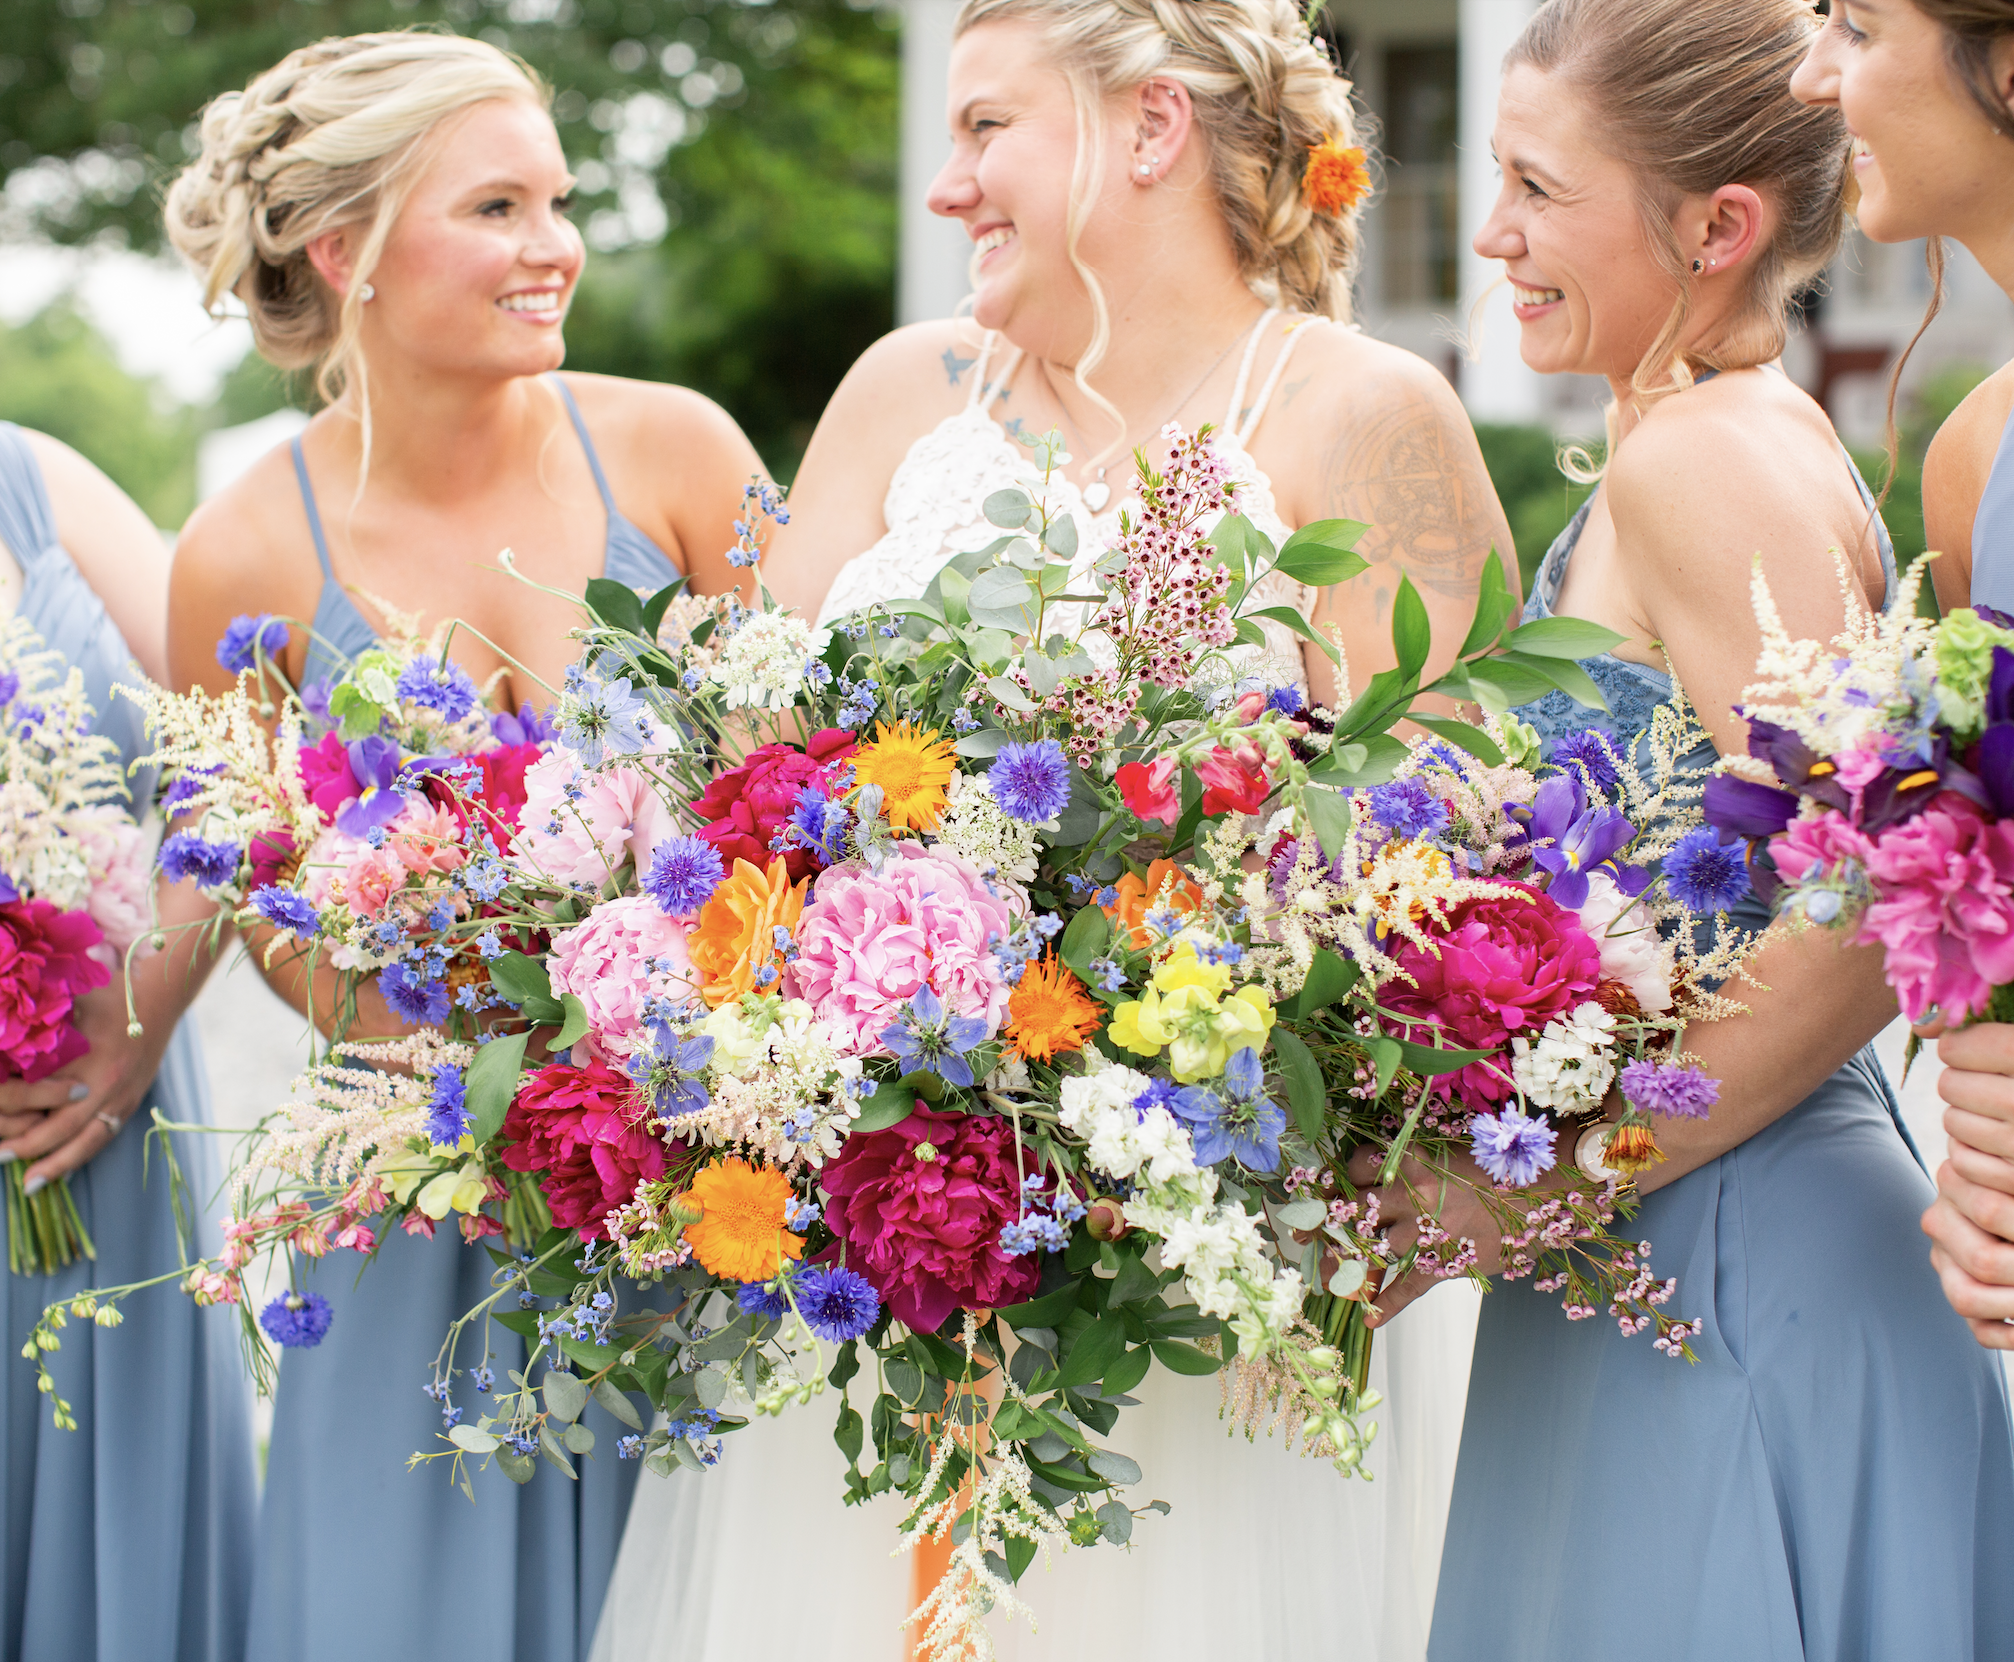 Spring wedding with wildflowers that are colorful and vibrant with bride and bridesmaids